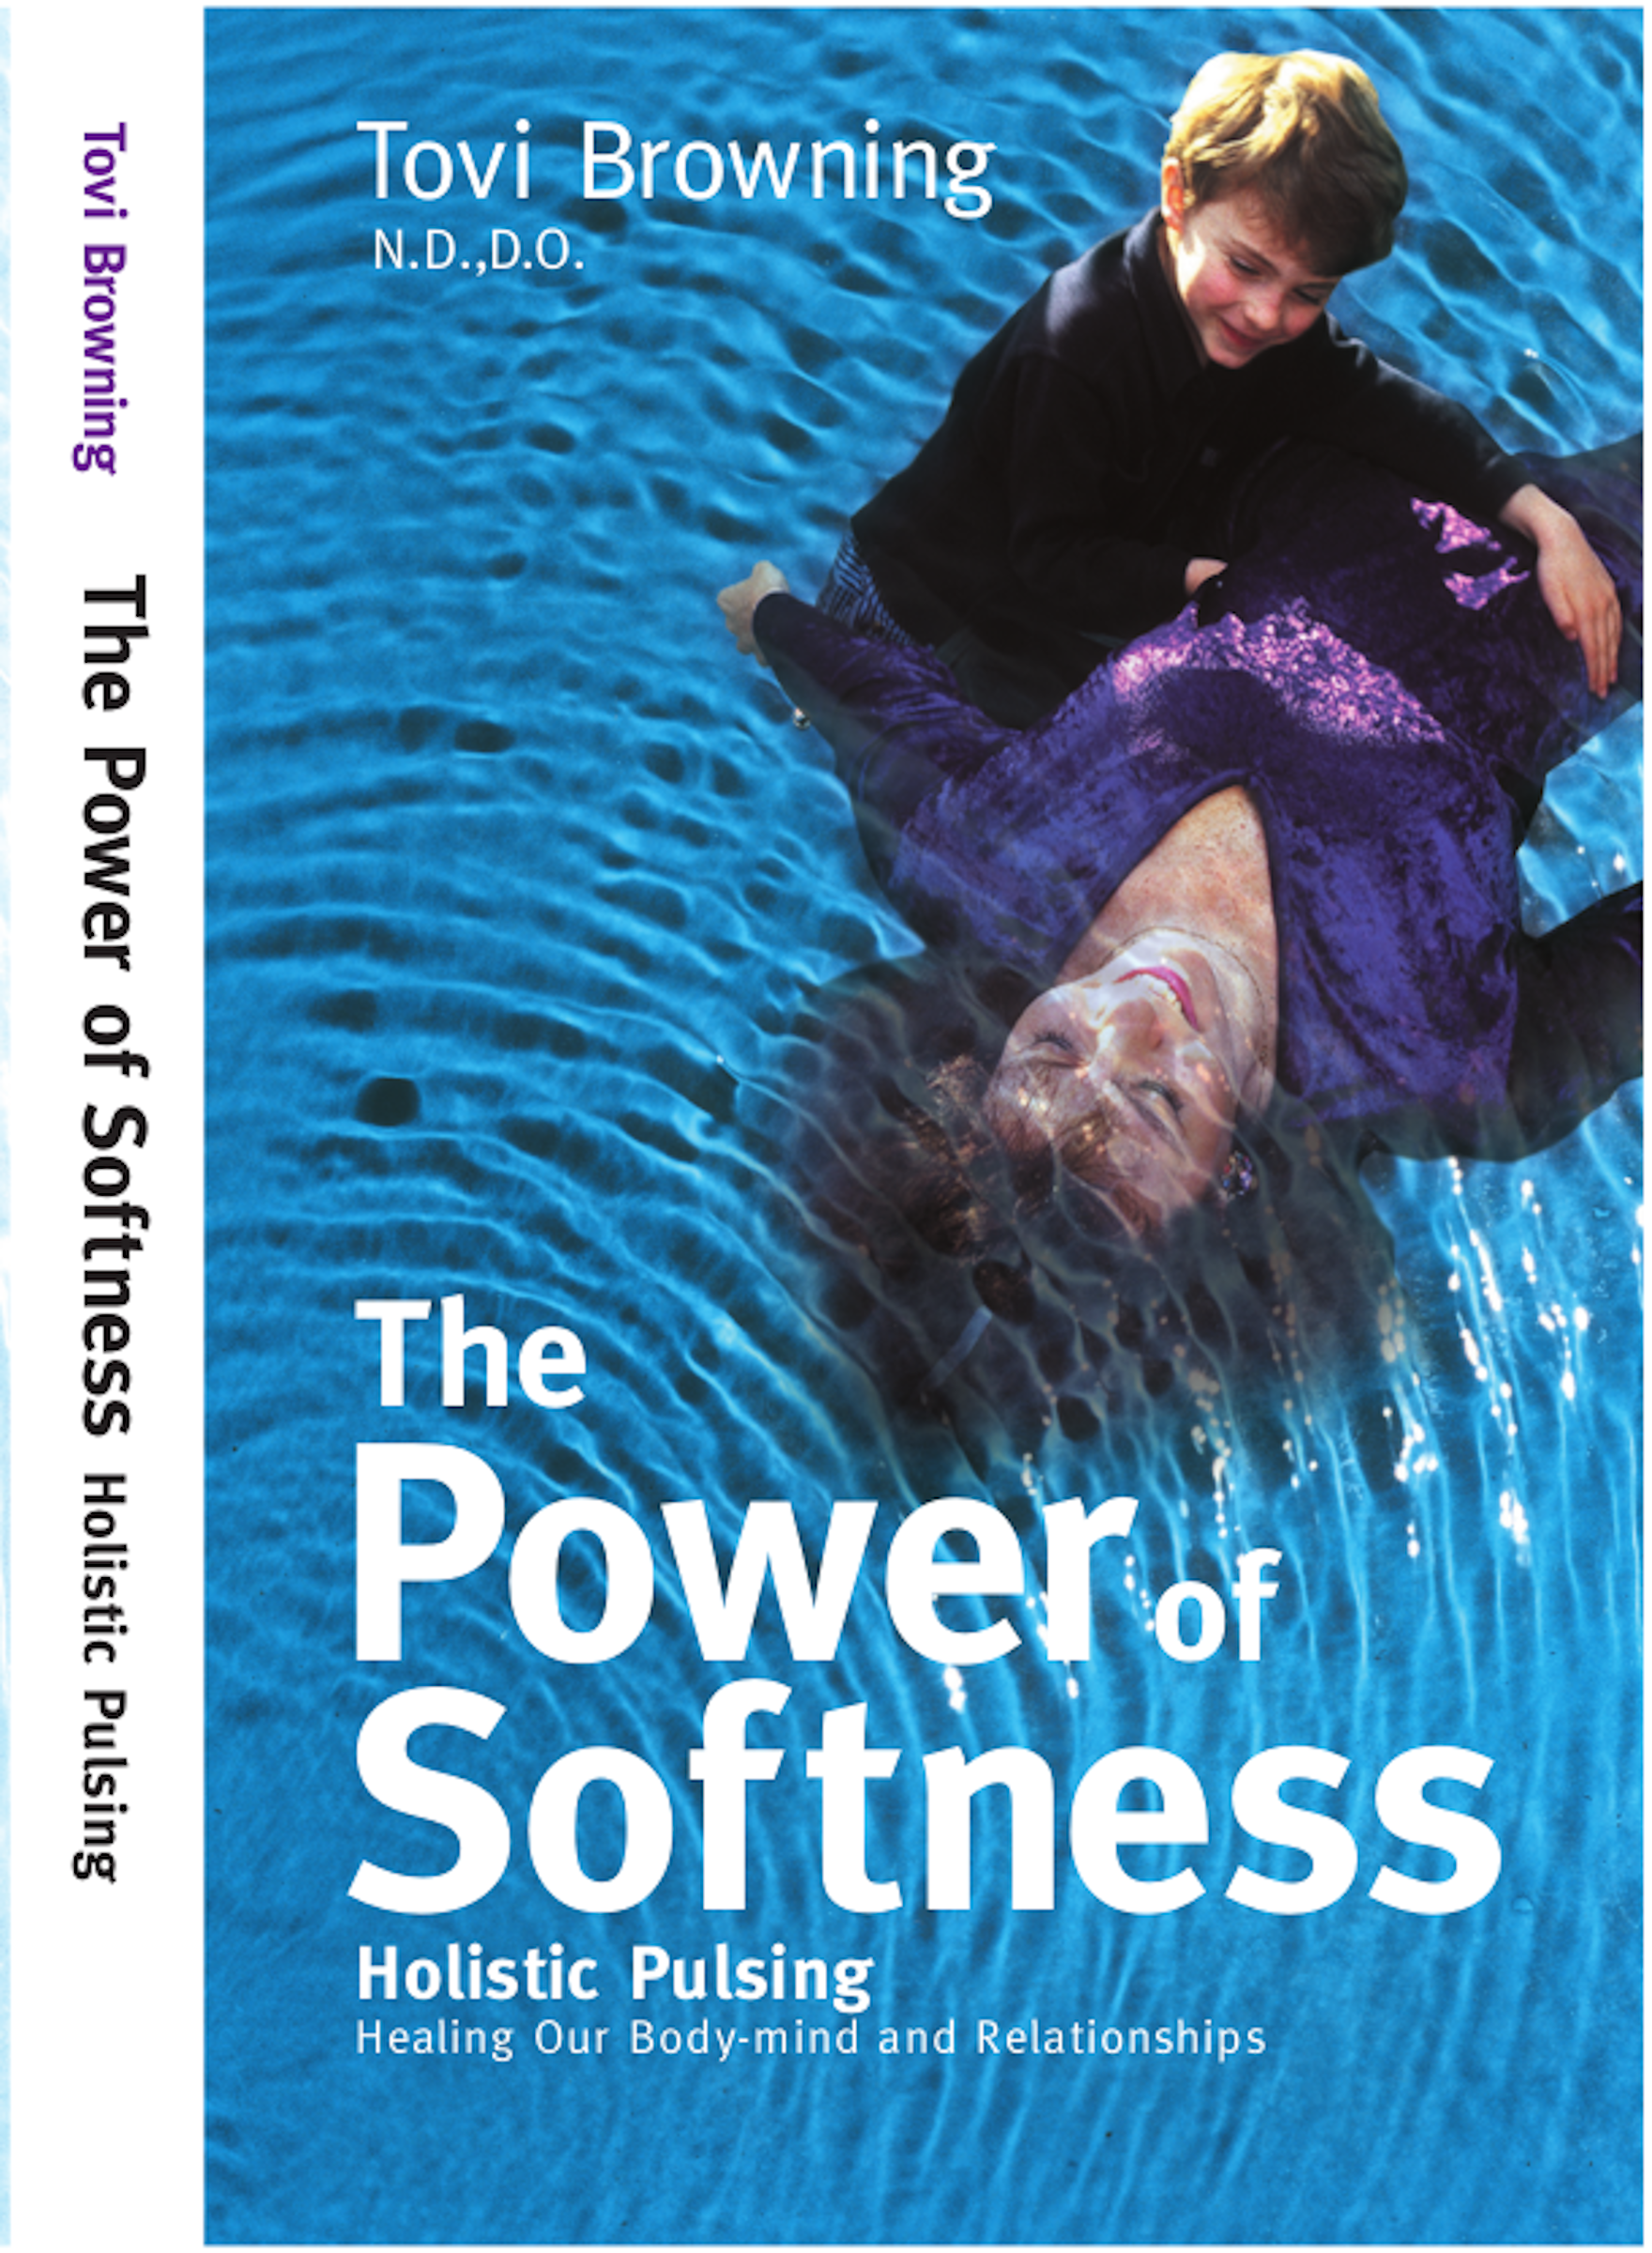 The Power of Softness by Tovi Browning